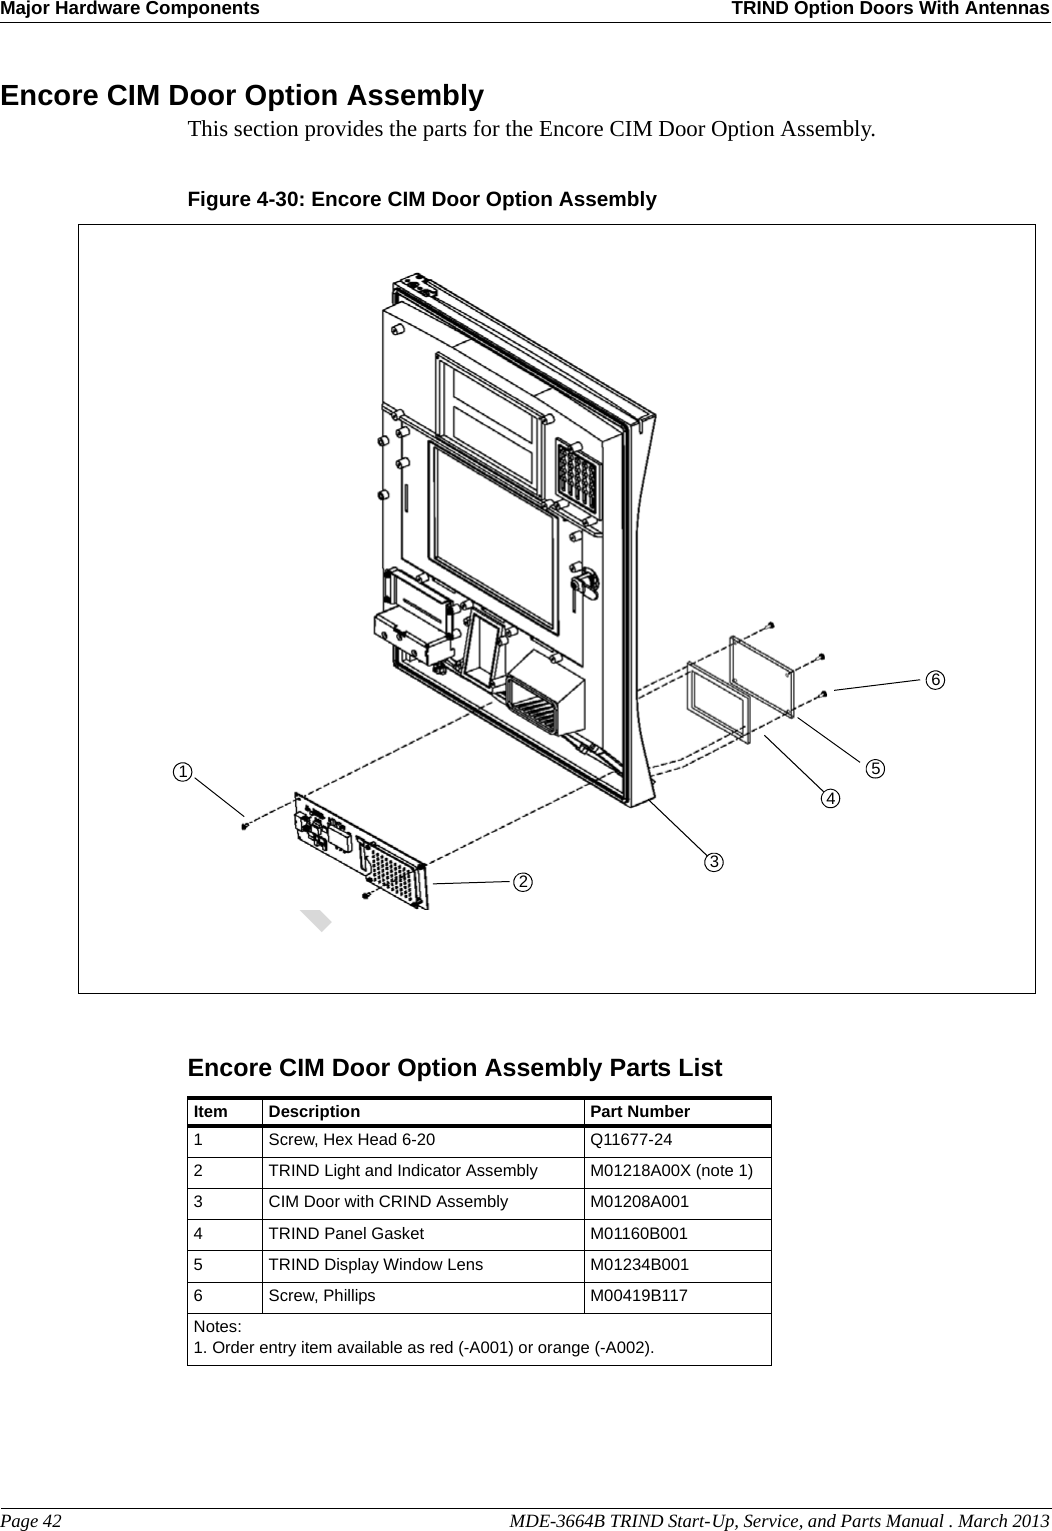 Major Hardware Components TRIND Option Doors With AntennasPage 42                                                                                                  MDE-3664B TRIND Start-Up, Service, and Parts Manual . March 2013PreliminaryEncore CIM Door Option AssemblyThis section provides the parts for the Encore CIM Door Option Assembly.Figure 4-30: 654321Encore CIM Door Option AssemblyEncore CIM Door Option Assembly Parts ListItem Description Part Number1Screw, Hex Head 6-20 Q11677-242TRIND Light and Indicator Assembly M01218A00X (note 1)3CIM Door with CRIND Assembly M01208A0014TRIND Panel Gasket M01160B0015TRIND Display Window Lens M01234B0016Screw, Phillips M00419B117Notes:1. Order entry item available as red (-A001) or orange (-A002).